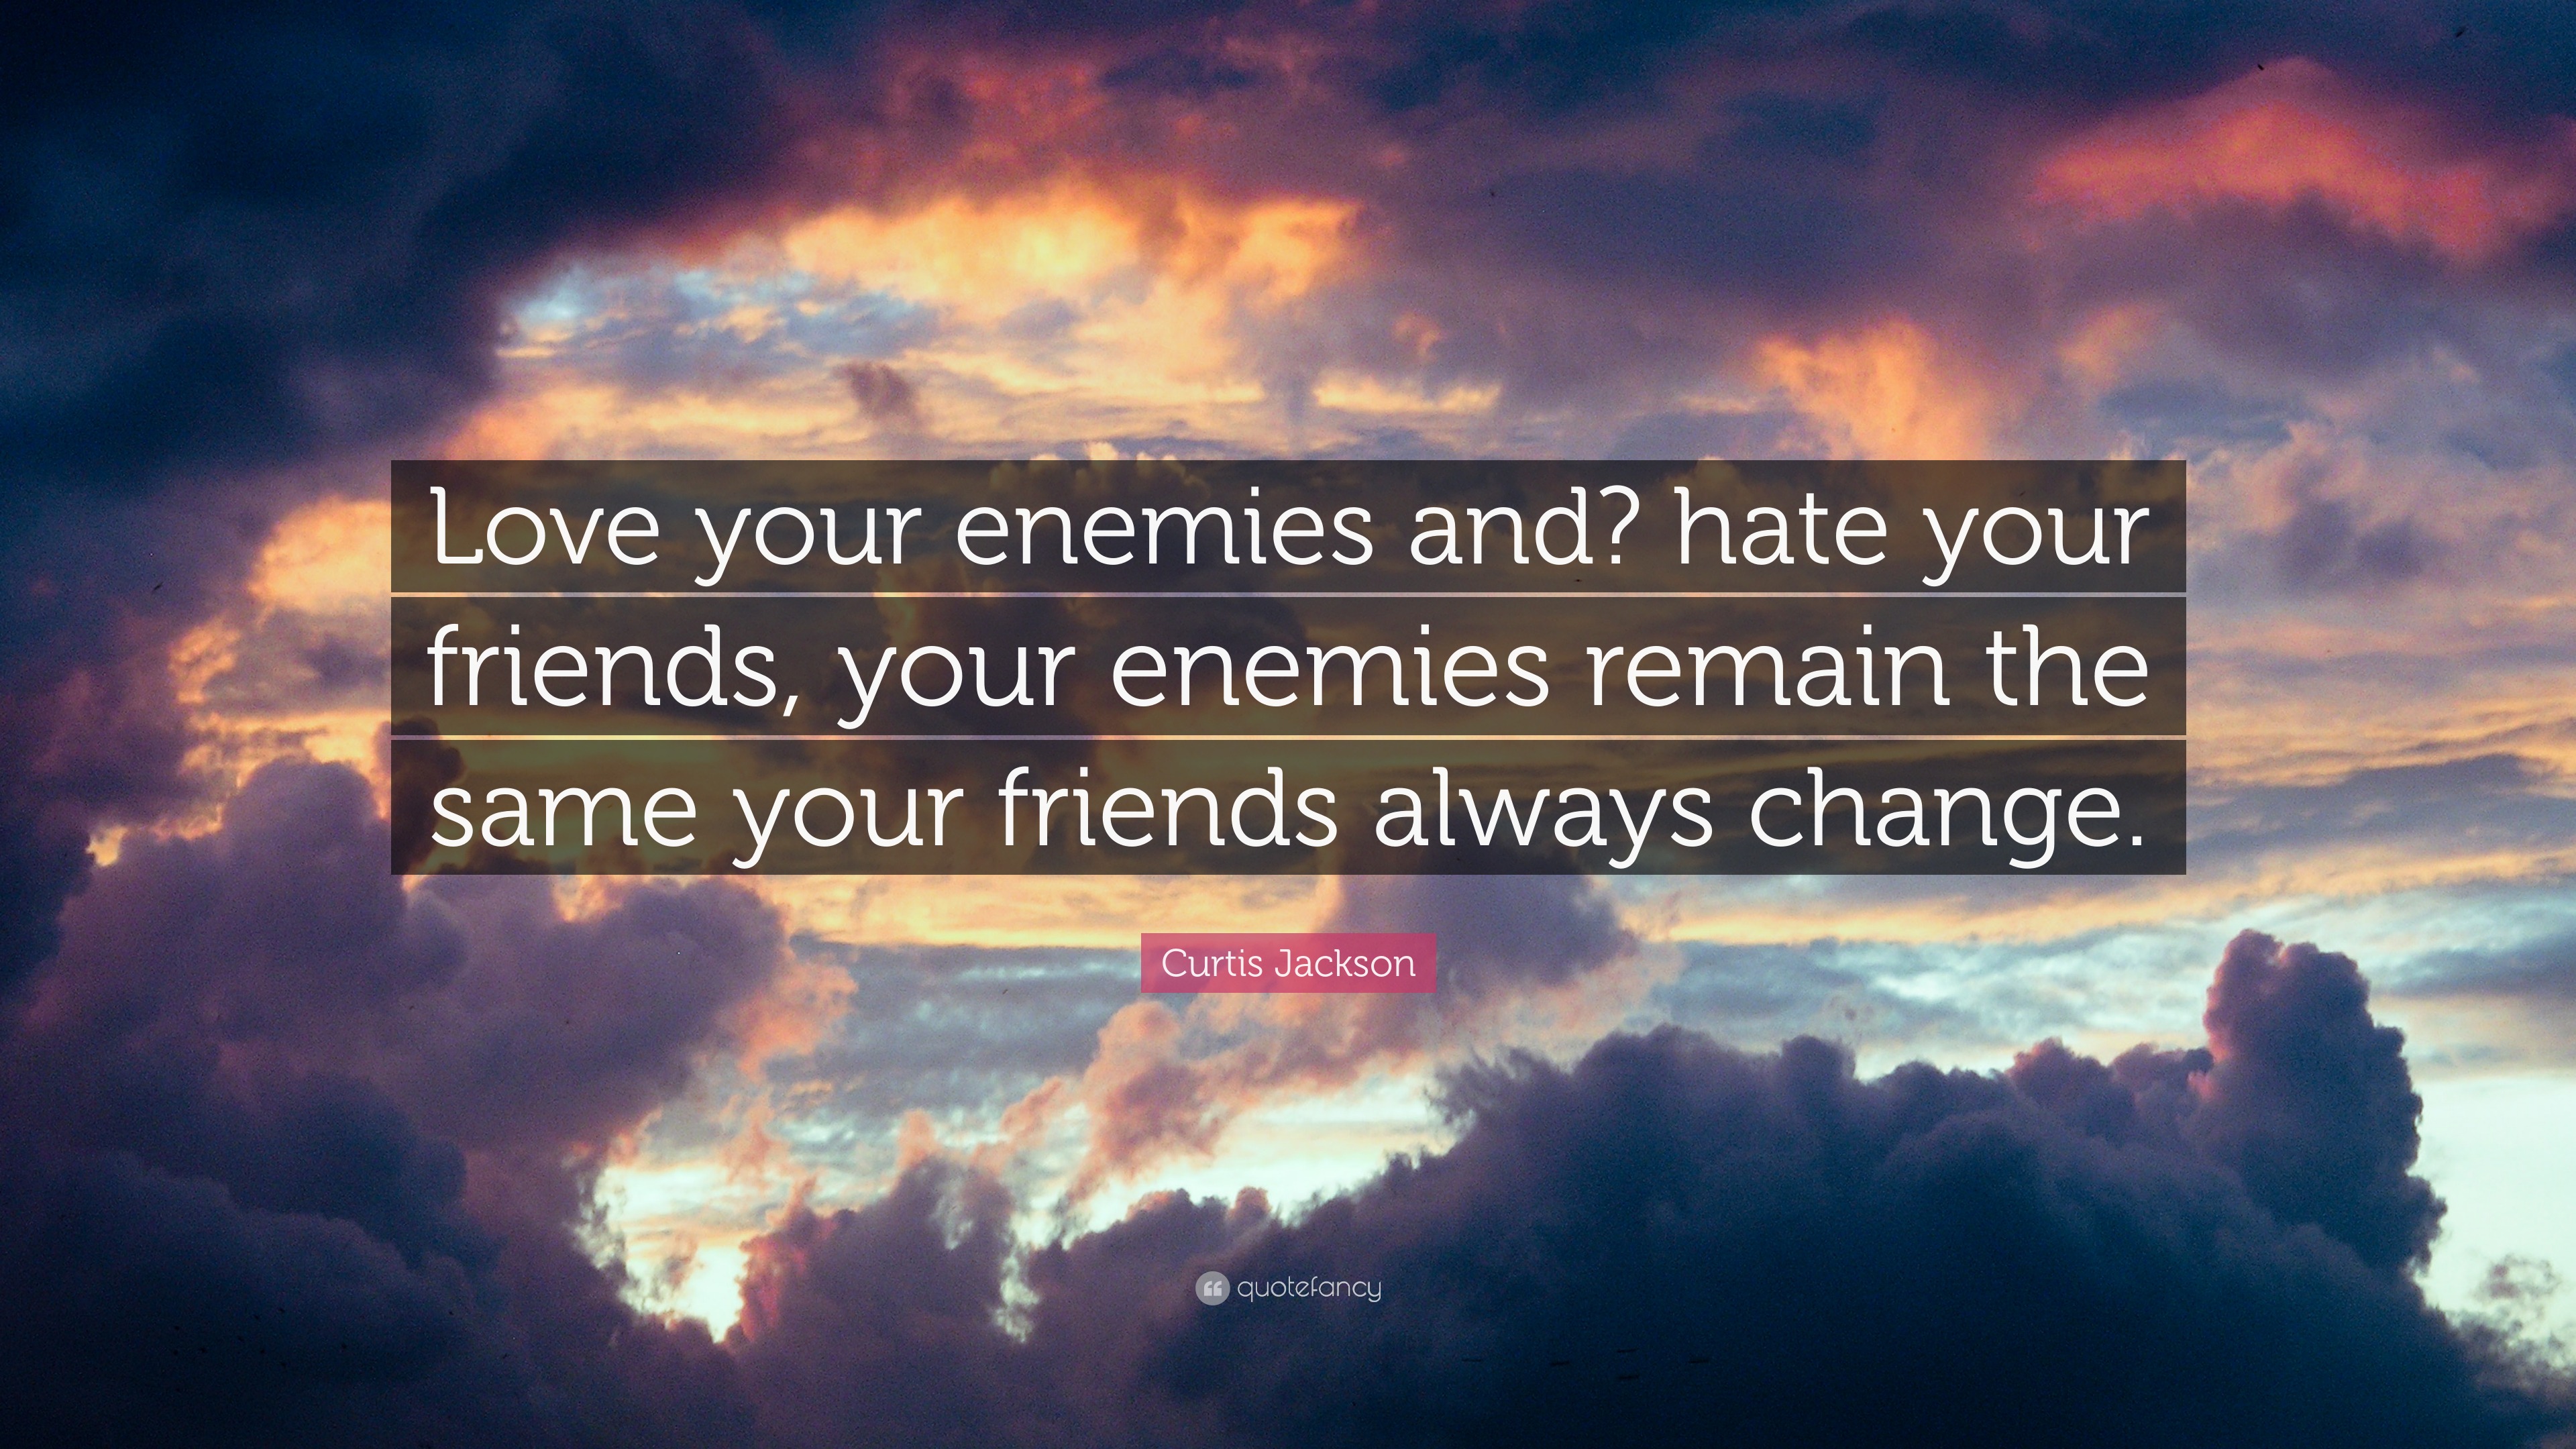 Curtis Jackson Quote: “Love your enemies and? hate your friends, your